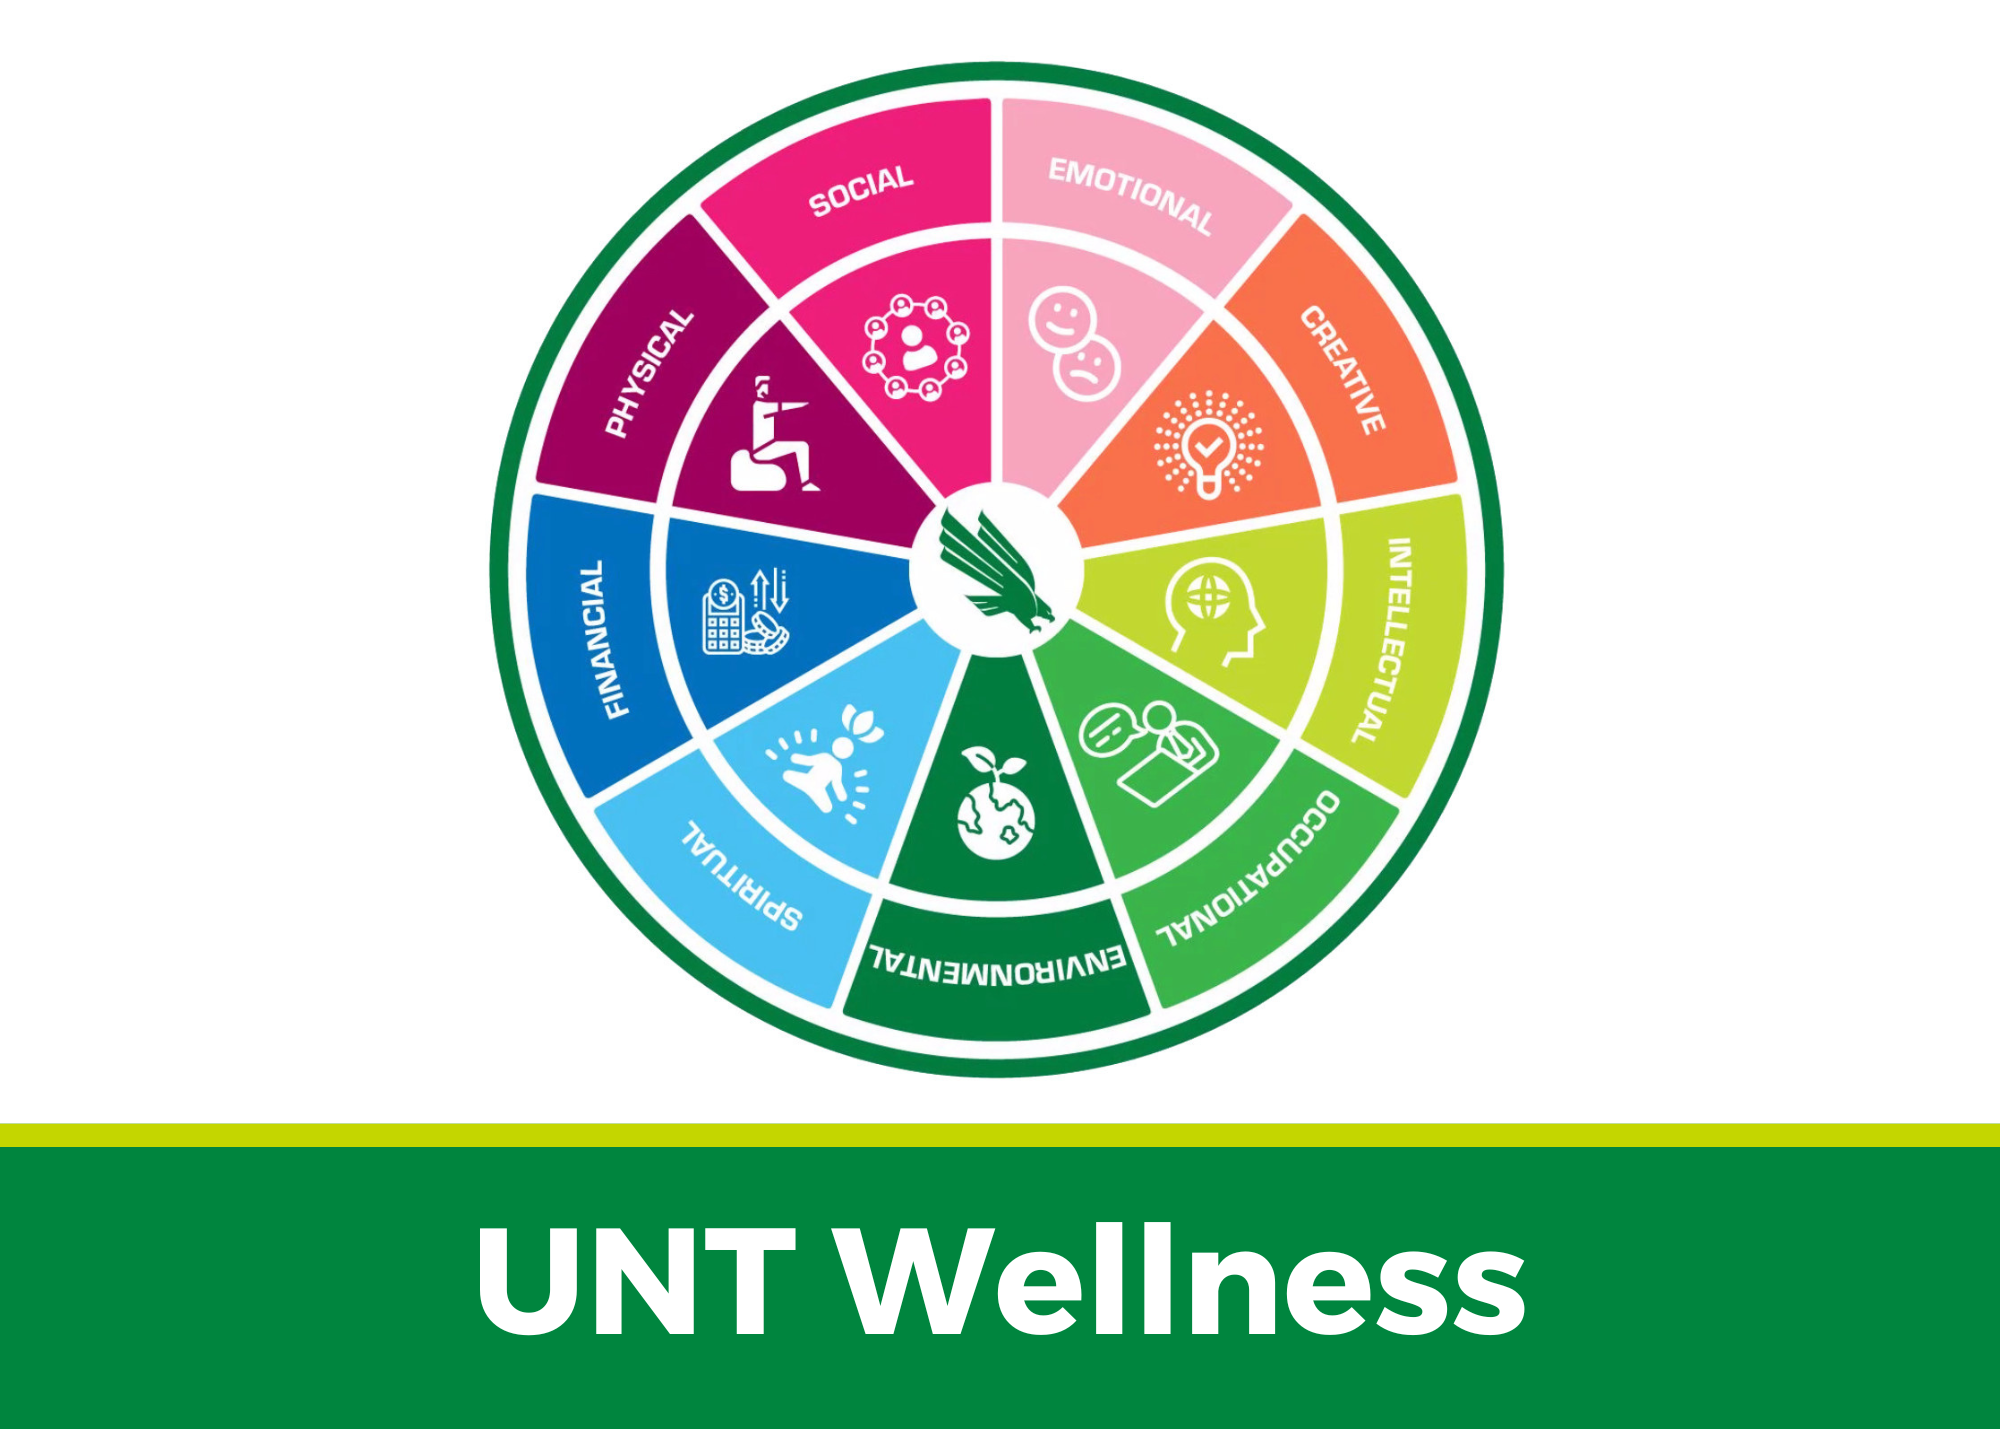 Picture of the UNT Wellness Wheel that highlights the areas of wellbeing: social, emotional, creative, intellectual, occupational, environmental, spiritual, financial, and physical